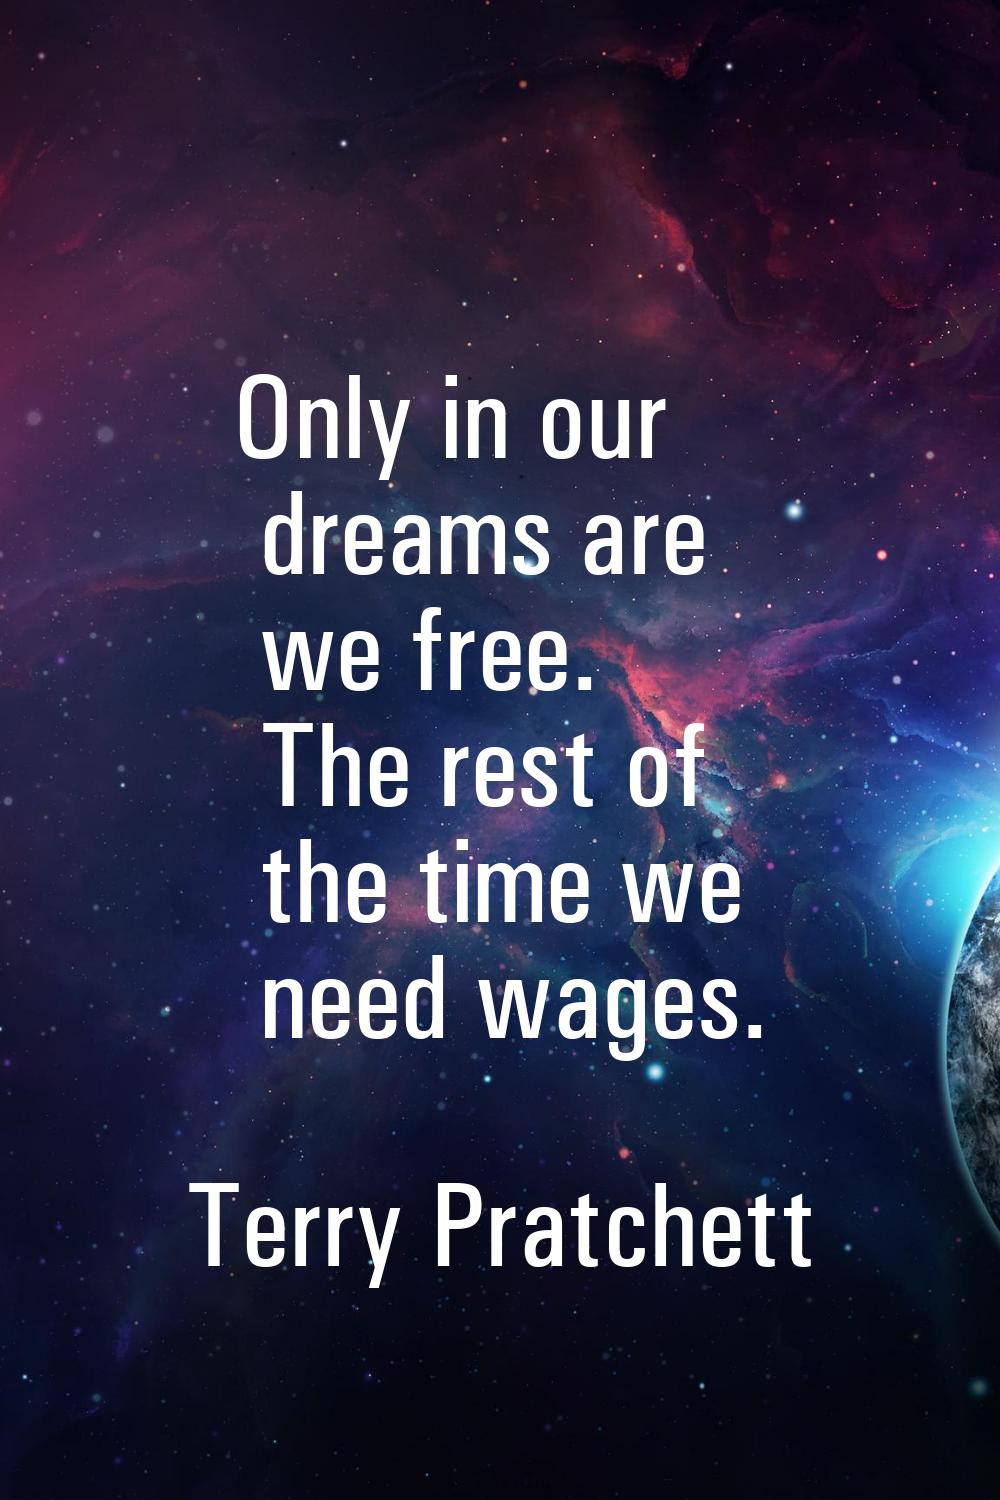 Only in our dreams are we free. The rest of the time we need wages.